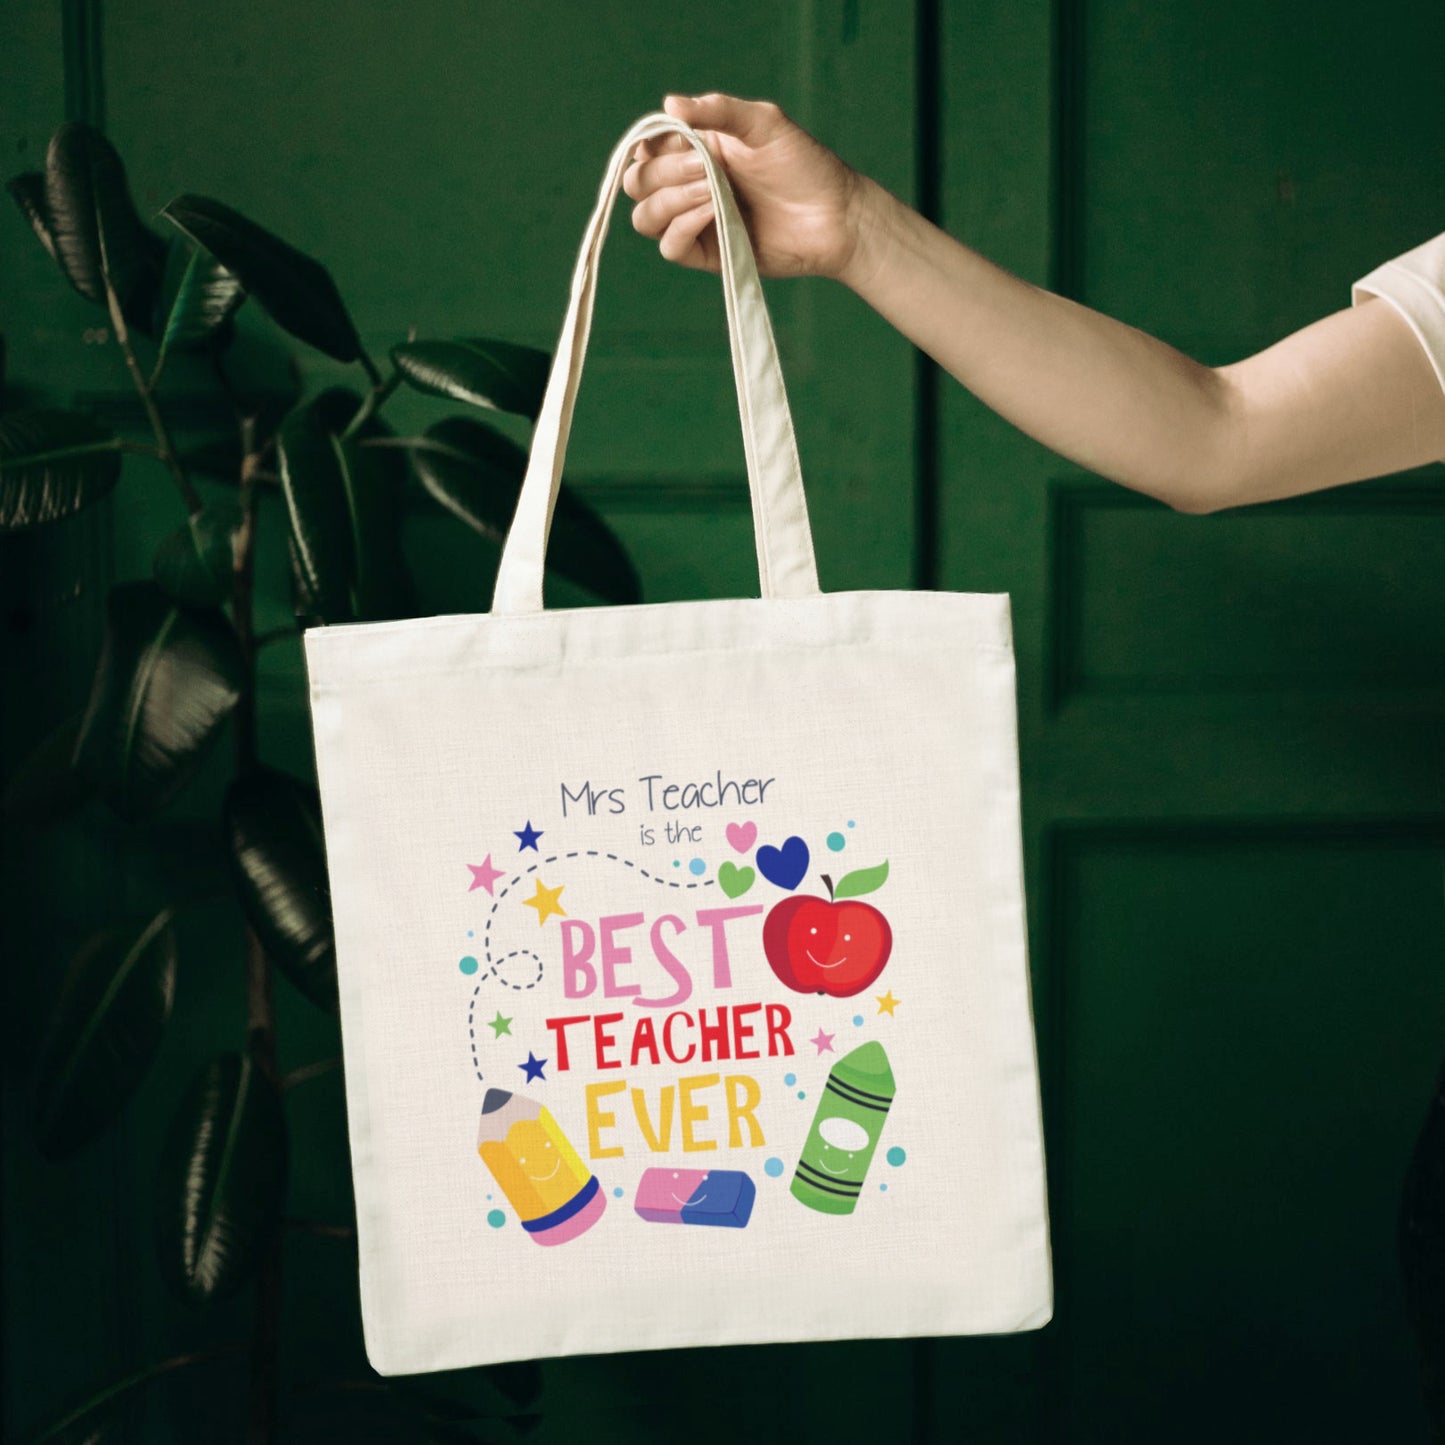 Best teacher ever personalised tote bag with stationery and apple